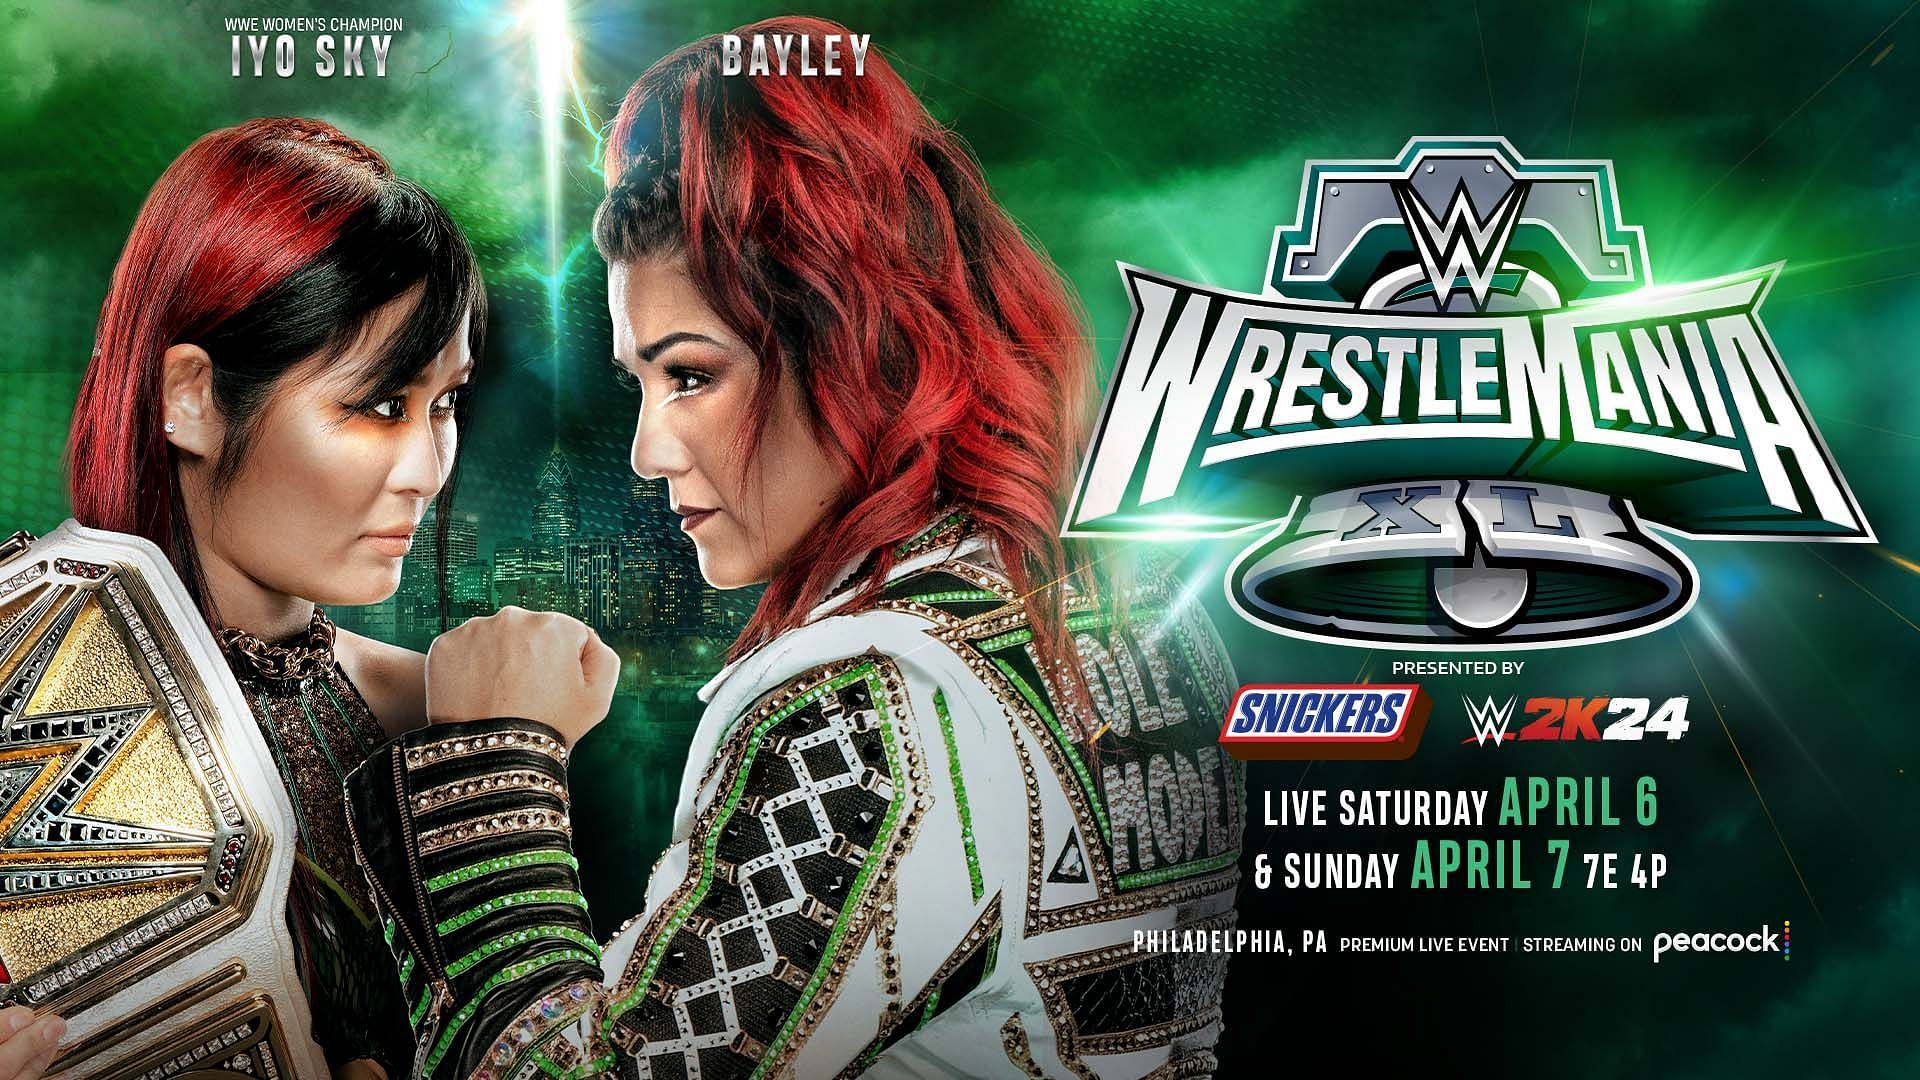 IYO SKY and Bayley will clash for the WWE Women